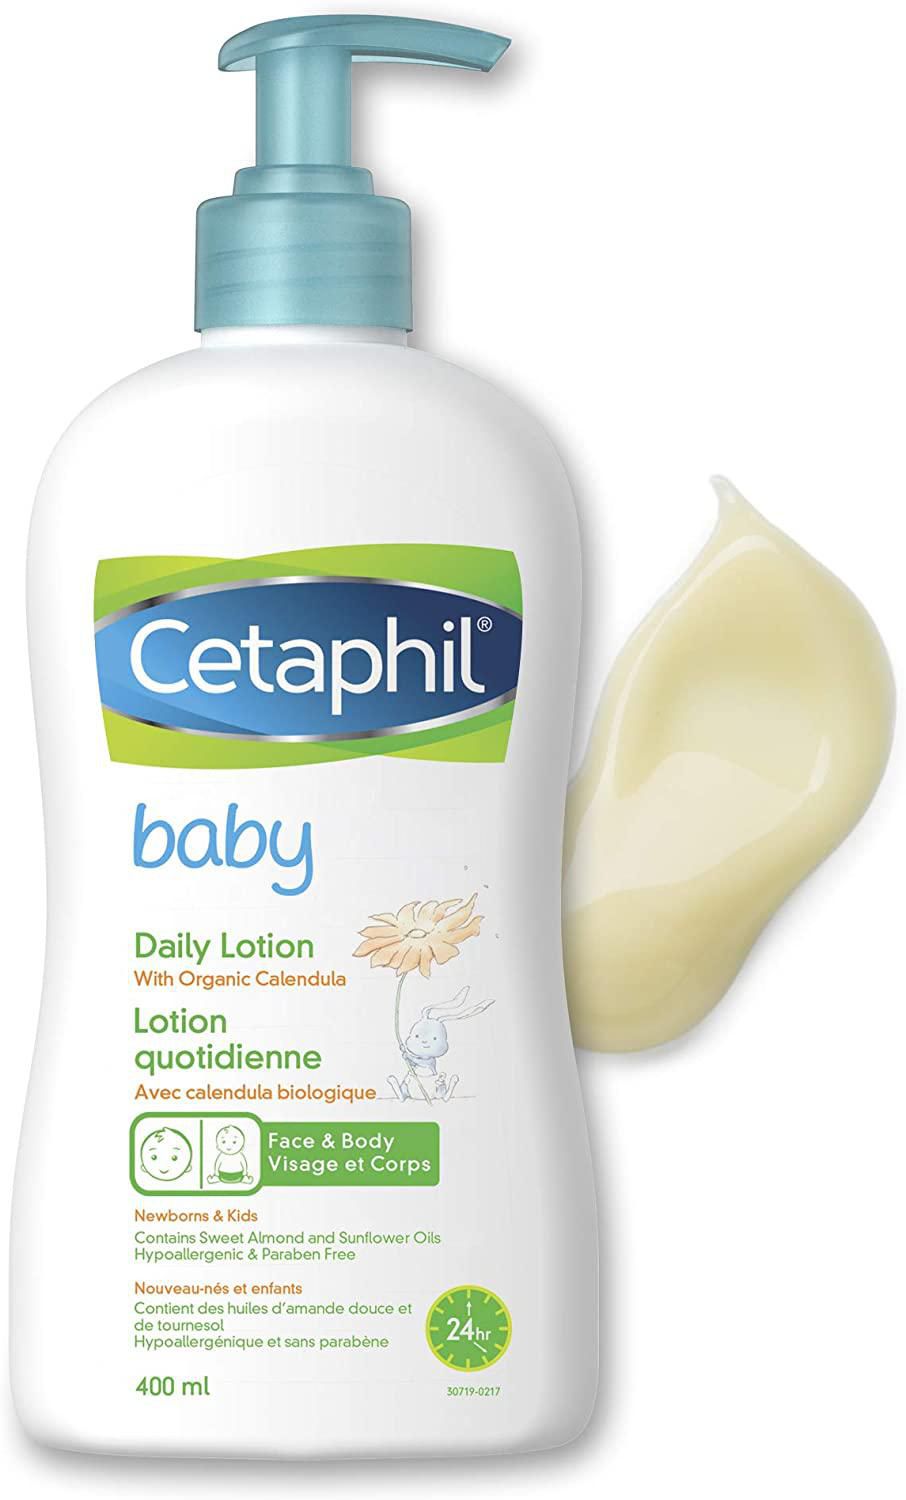 Cetaphil Baby Daily Lotion with Organic Calendula | 24hr Hydration | Hypoallergenic and Pediatrician Recommended | 400ml with Pump